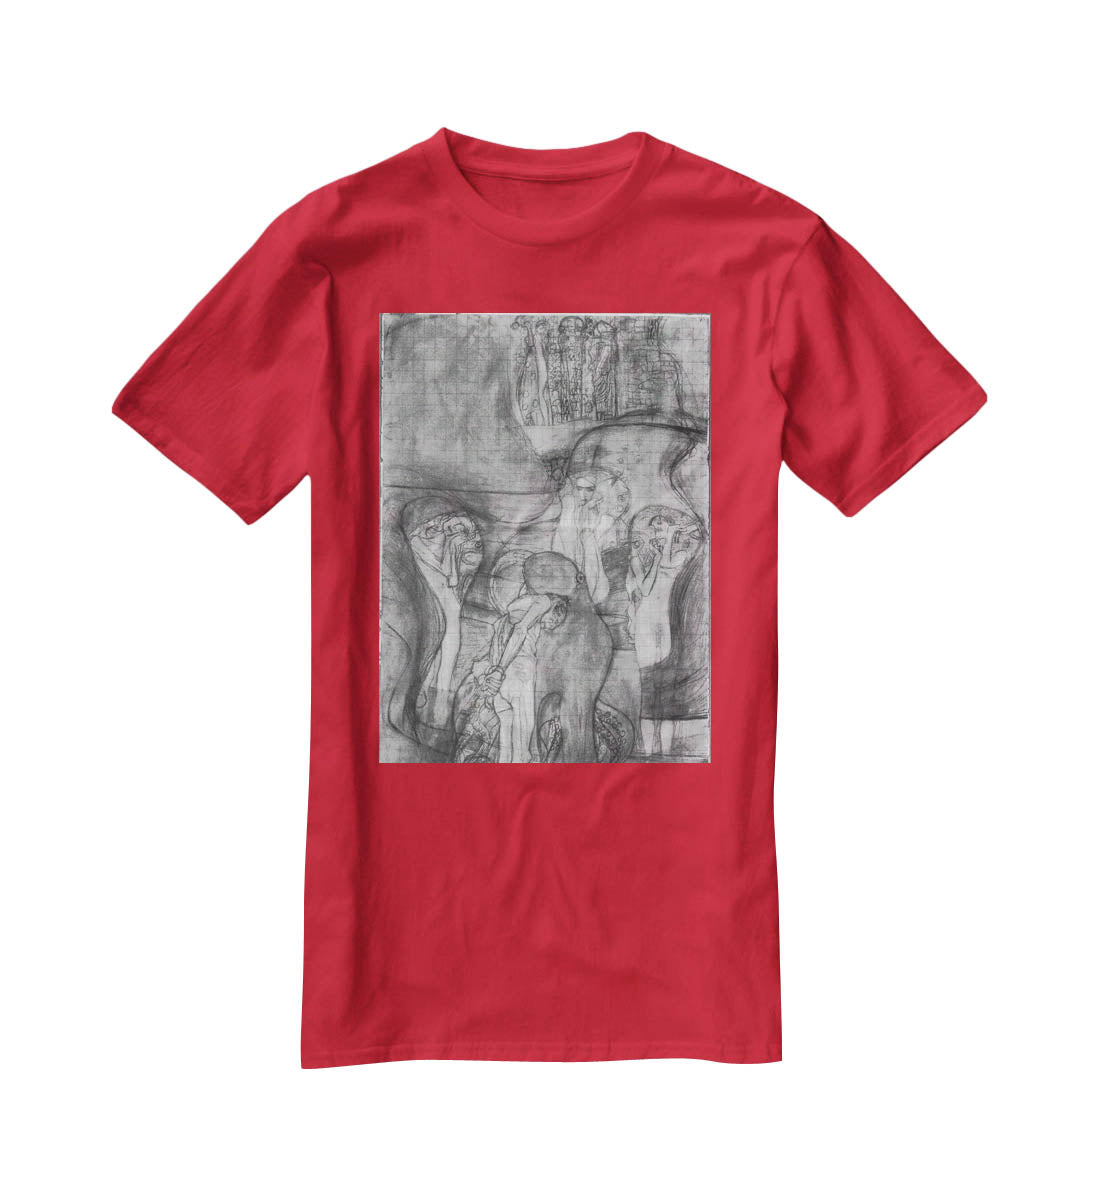 Composition draft of the law faculty image by Klimt T-Shirt - Canvas Art Rocks - 4